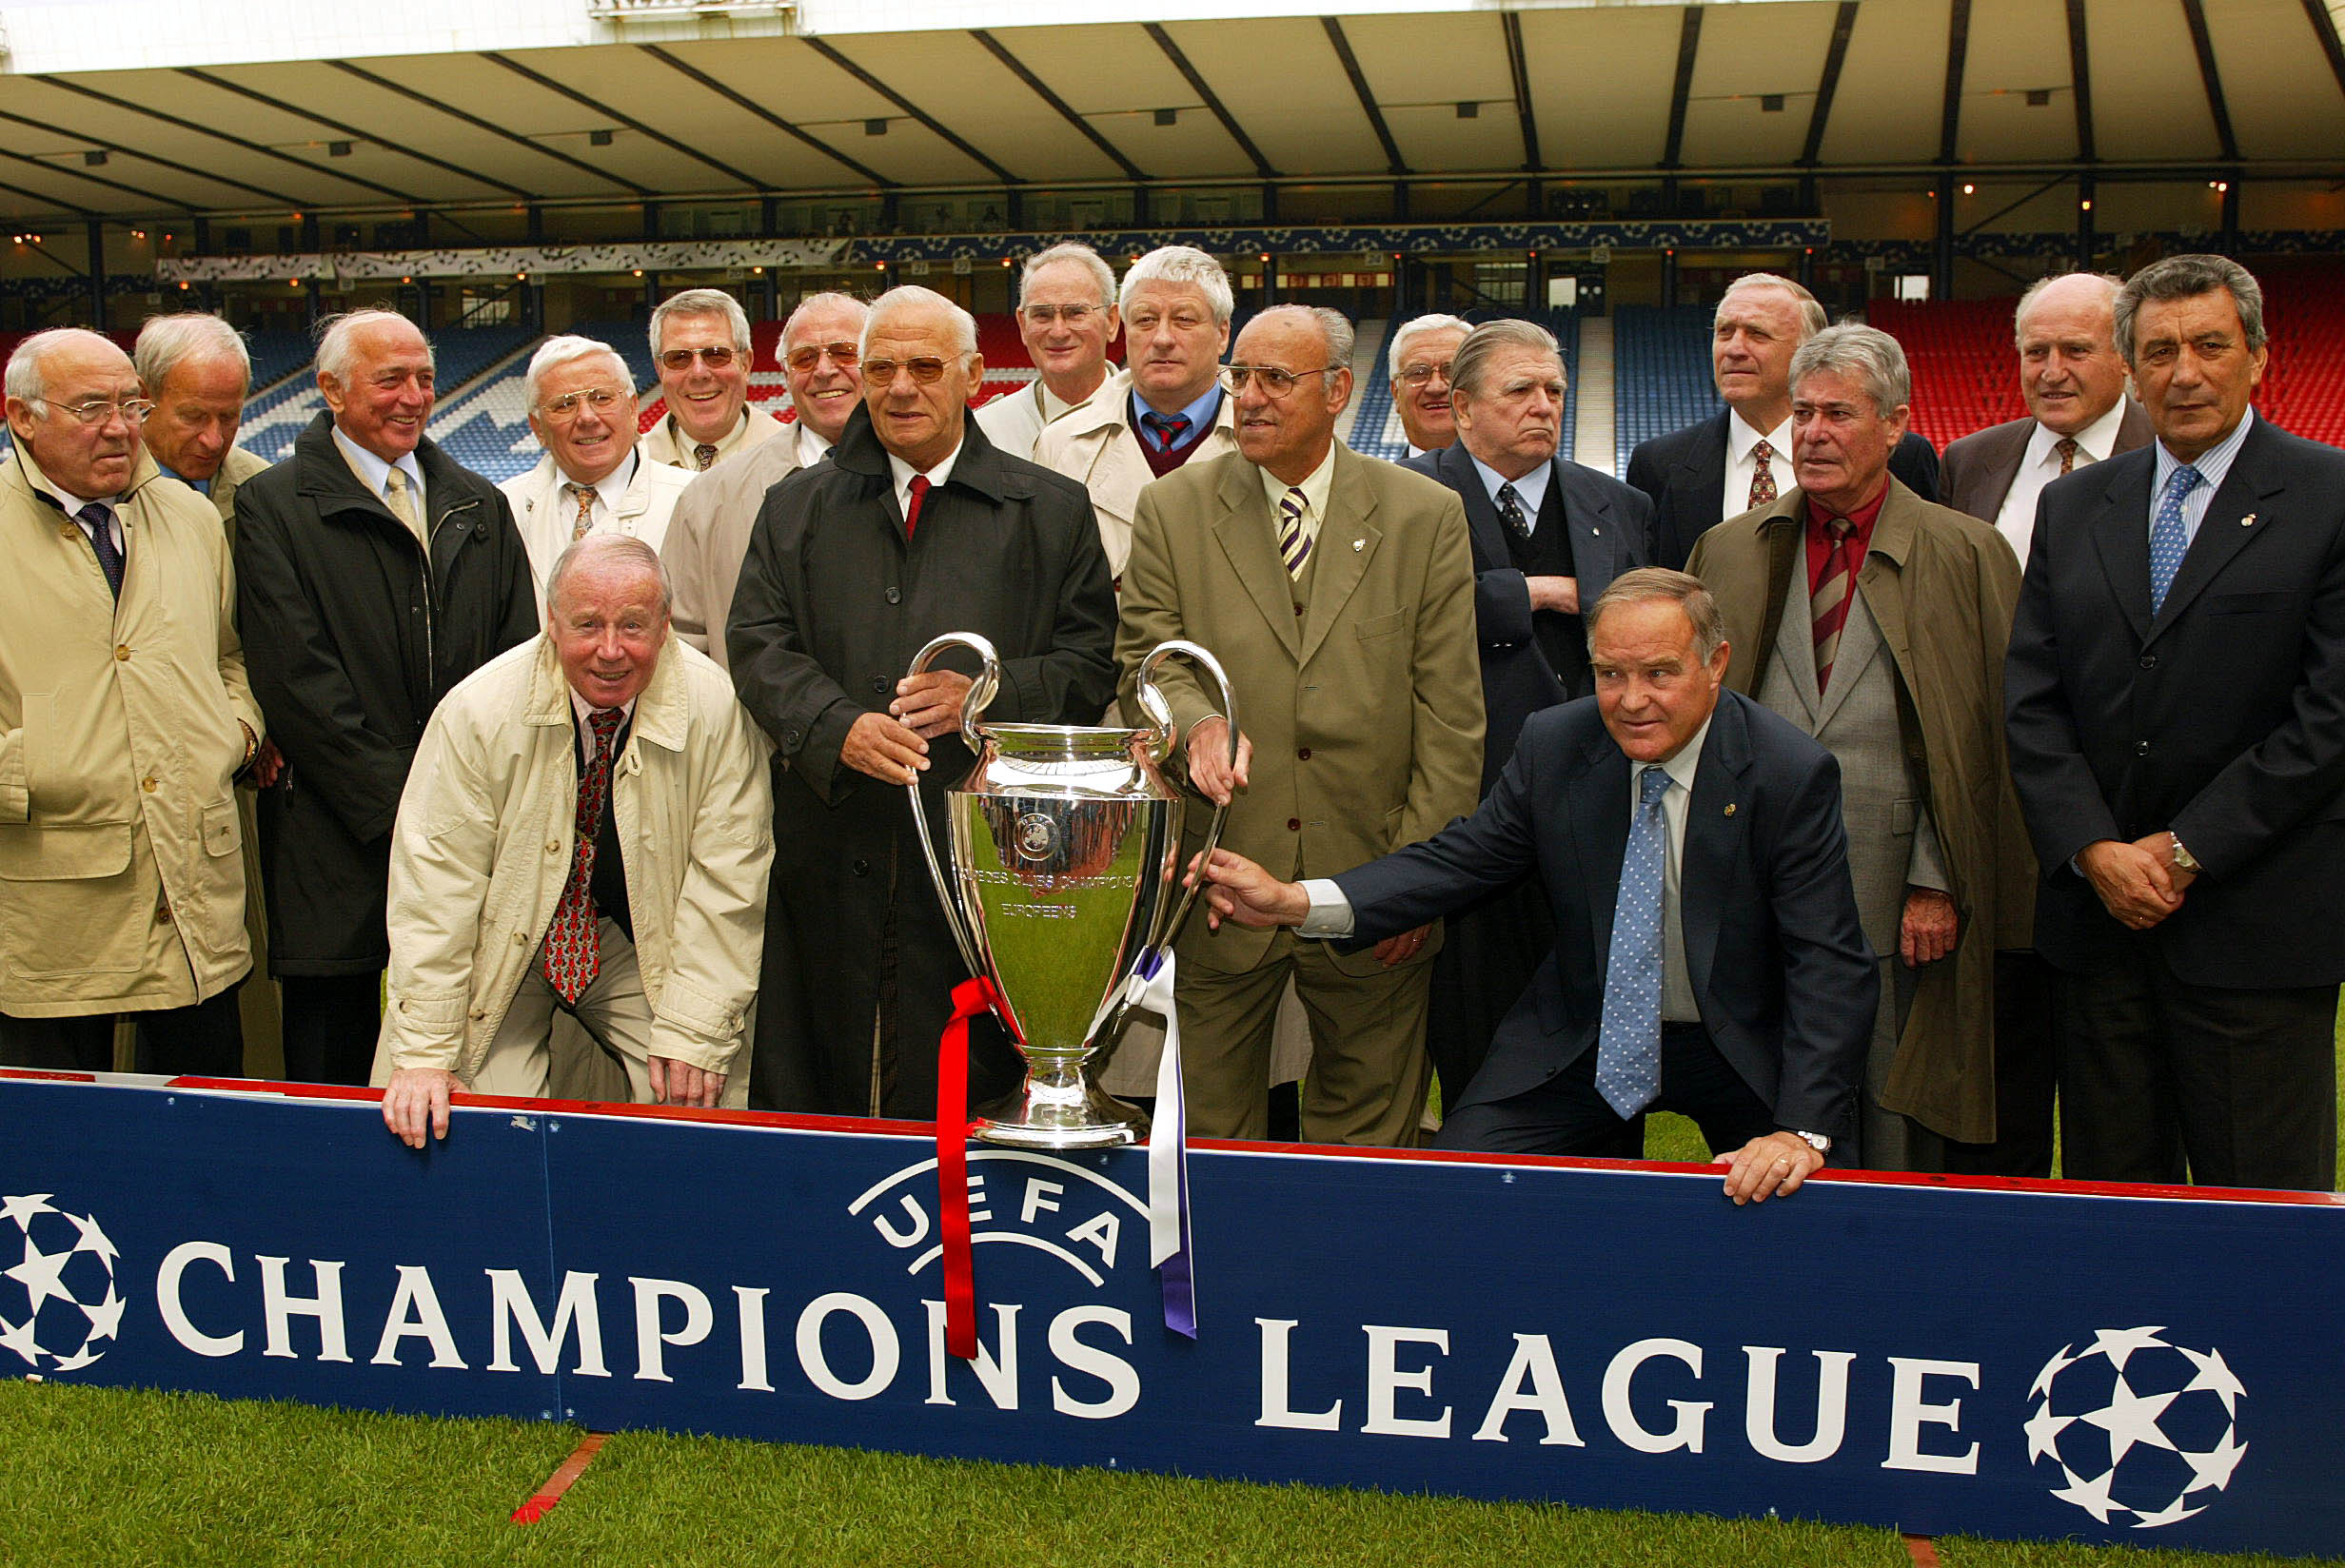 Former Real Madrid and Eintracht Frankfurt players reacquaint themselves with Hampden Park, the scene of the legendary 1960 European Cup Final between the two sides.